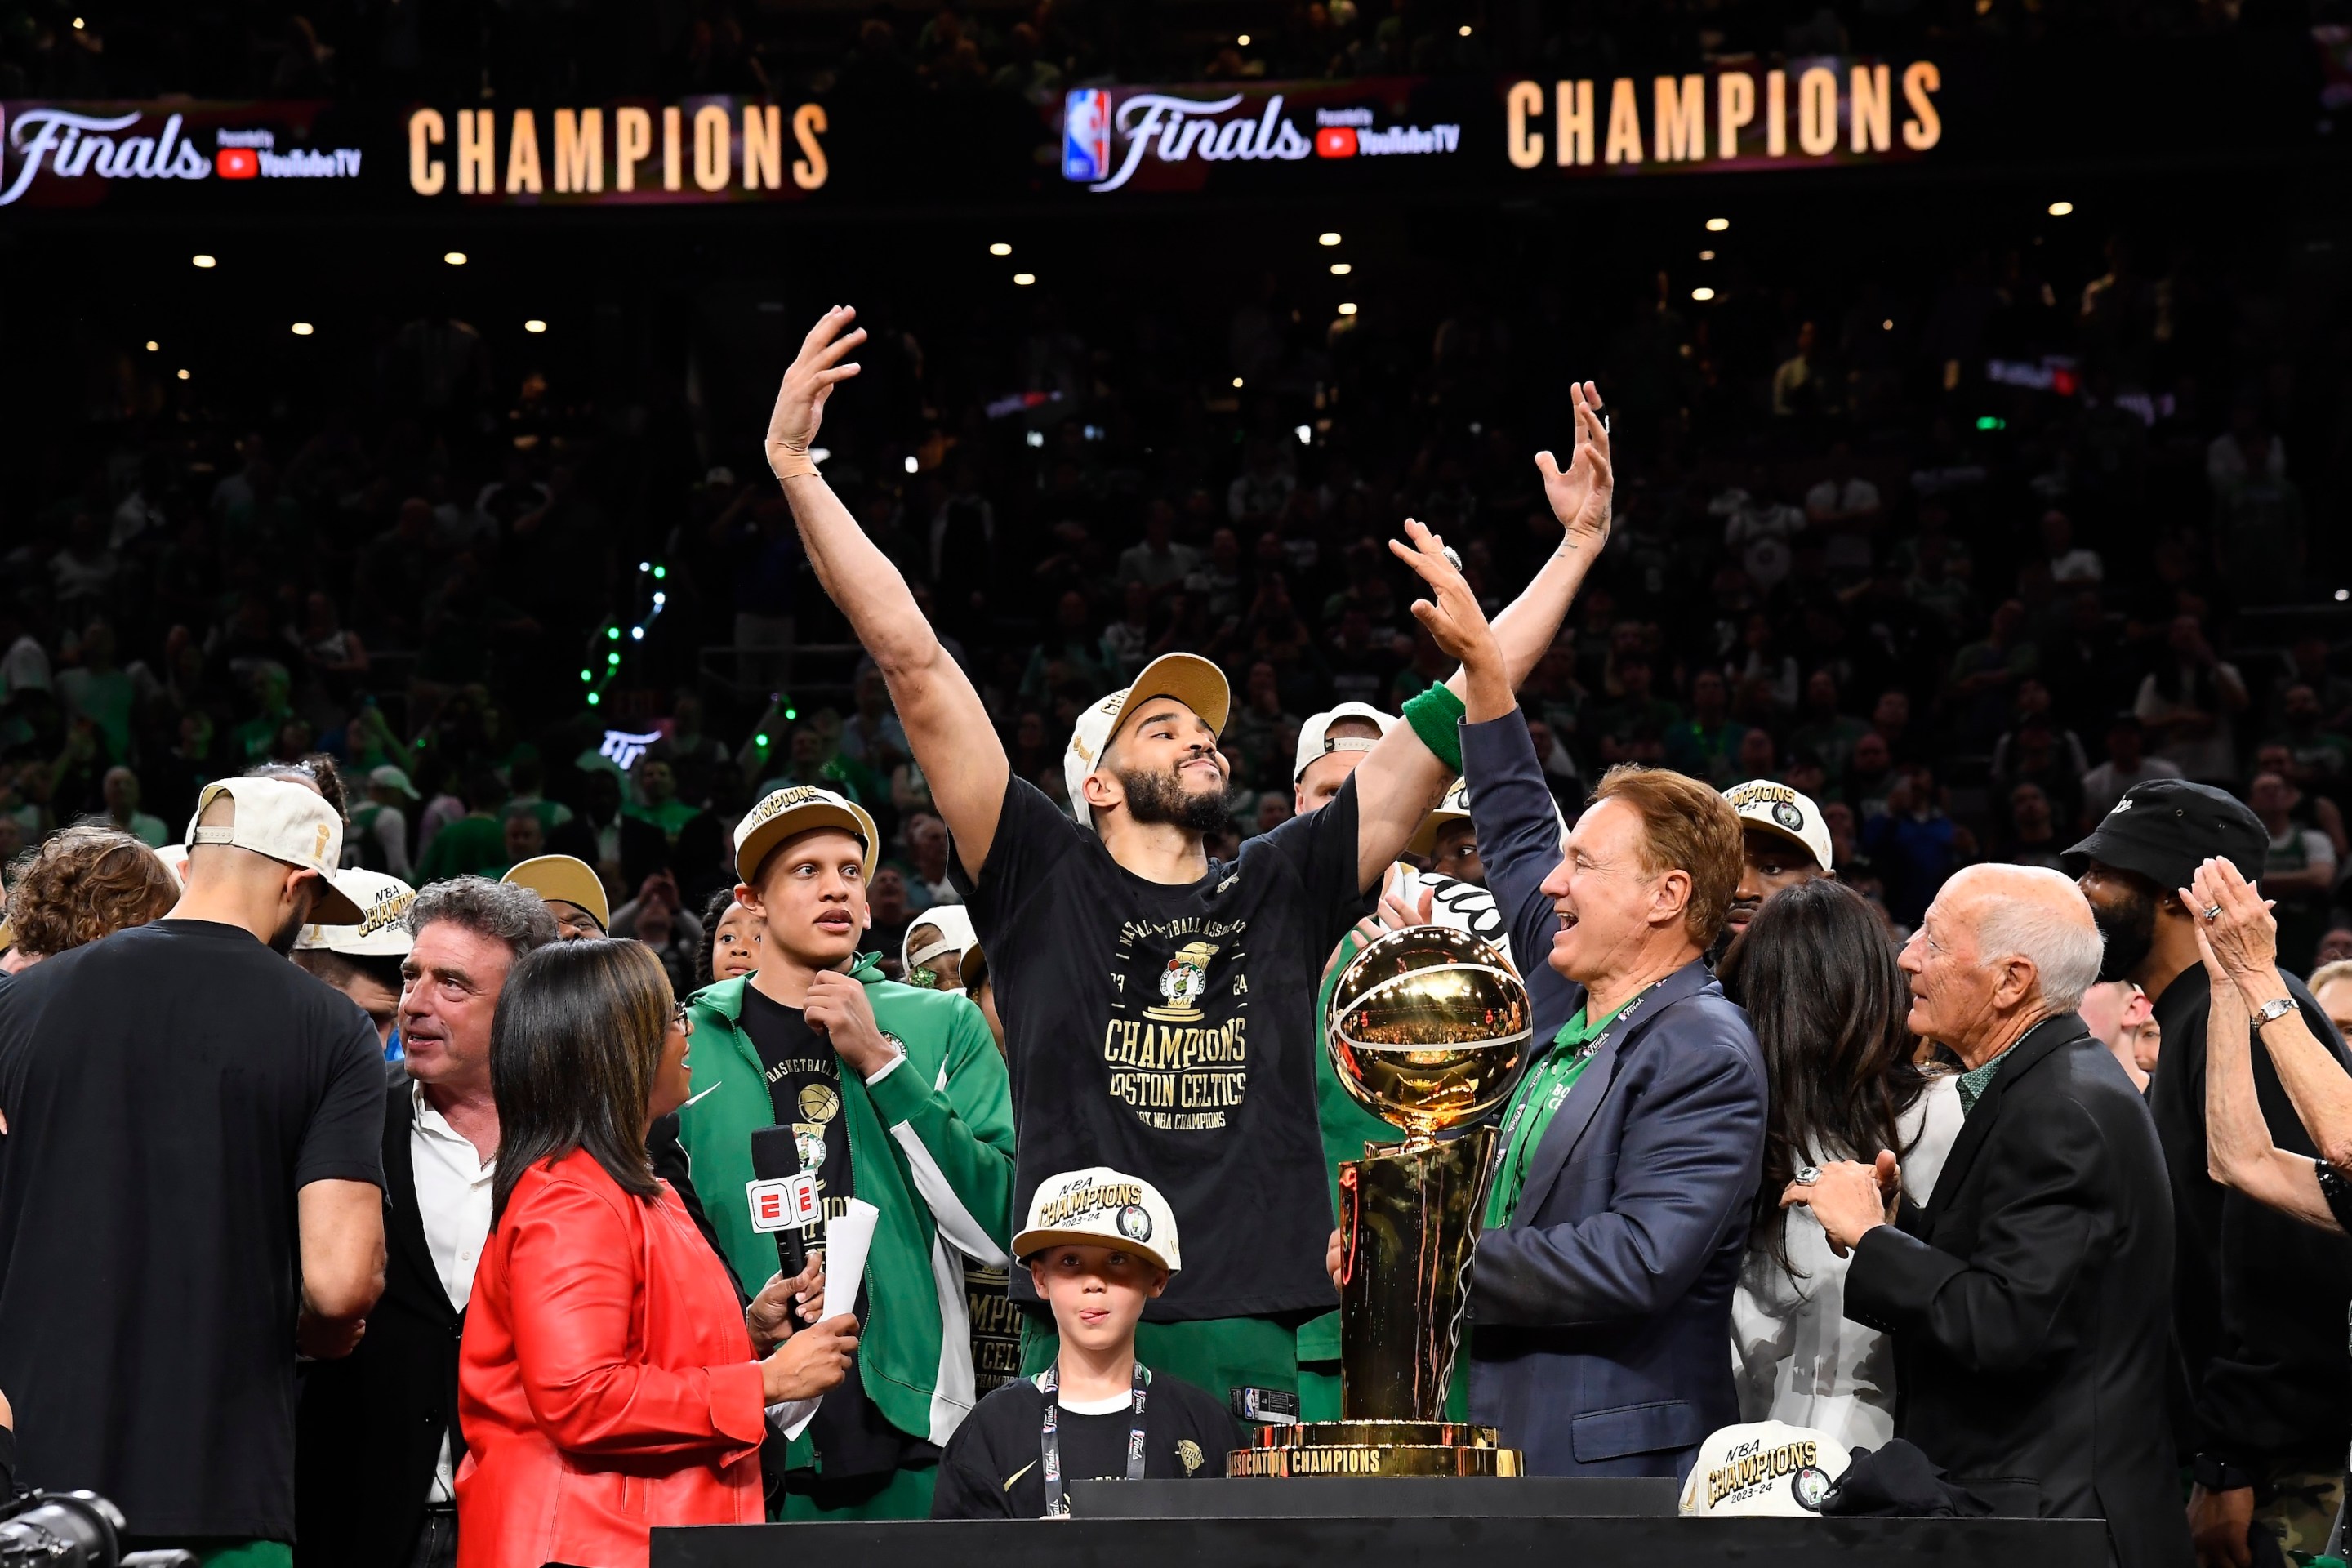 Jayson Tatum of the Boston Celtics exults near the Larry O'Brien Trophy after his team's win in the decisive Game 5 of the 2024 NBA Finals.